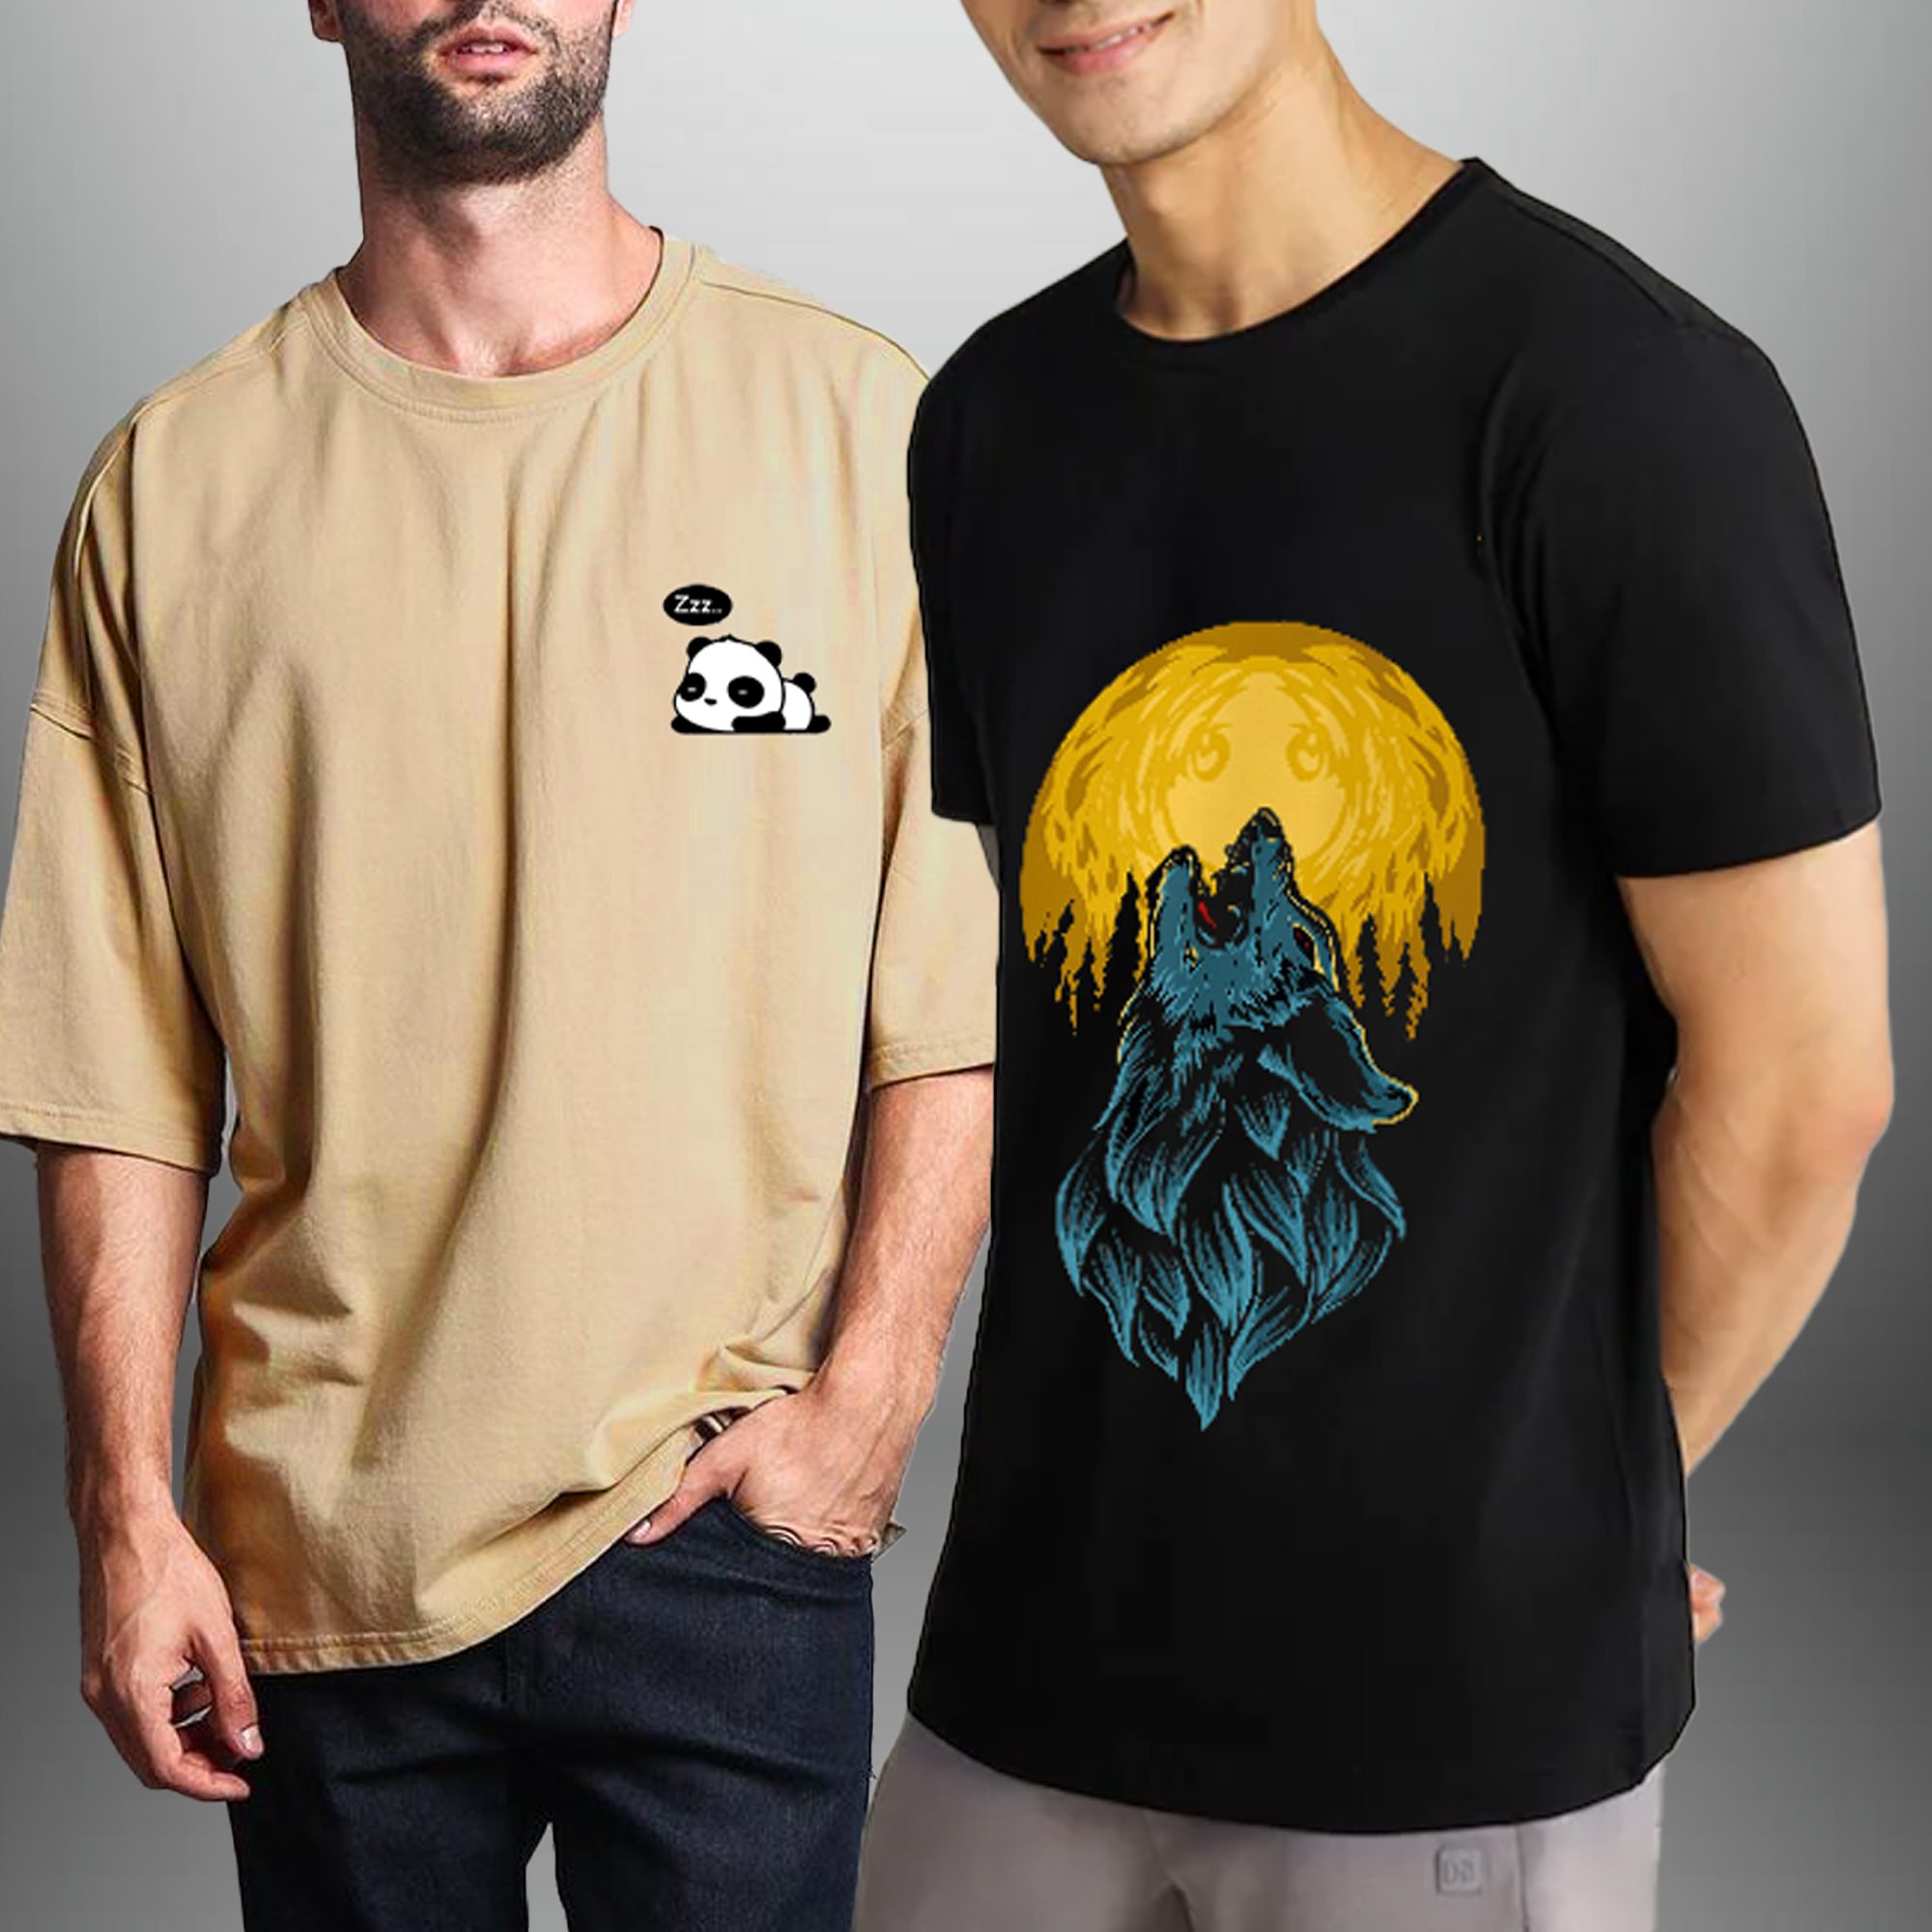 Pack Of 2 Men's  Beige &  Black Graphic Printed T-Shirts-RKTMCO004